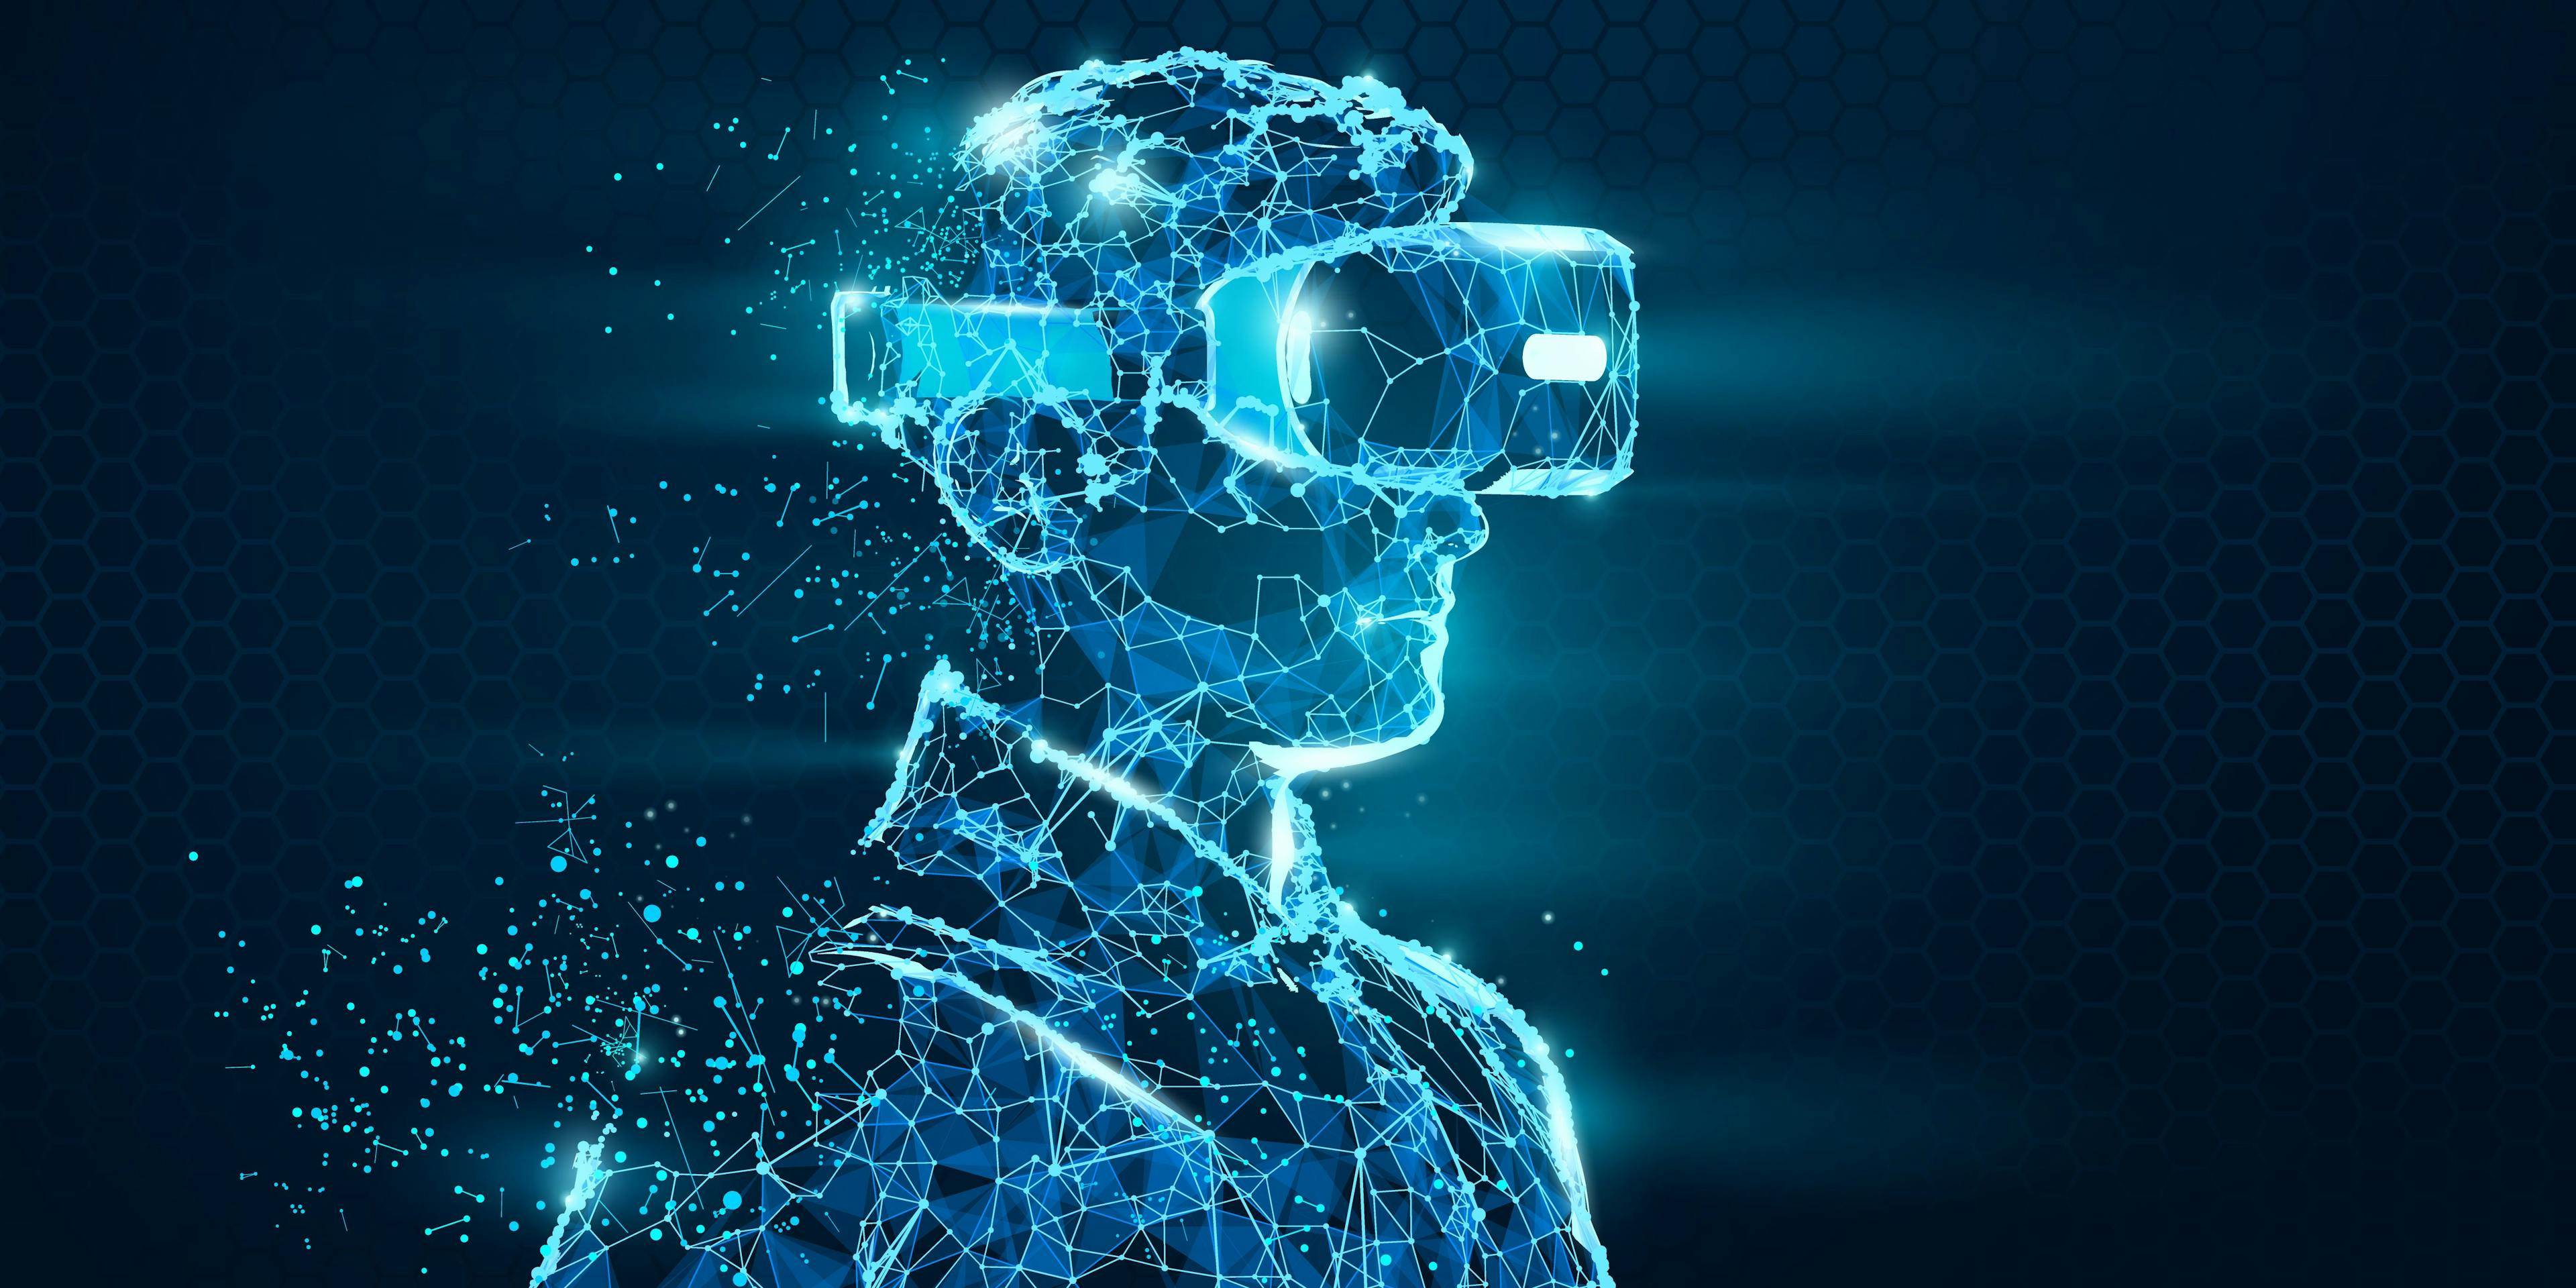 VR headset holographic low poly wireframe vector banner. Polygonal man wearing virtual reality glasses, helmet. VR games playing. Particles, dots, lines, triangles on blue background. Neon light.: © matrosovv - stock.adobe.com